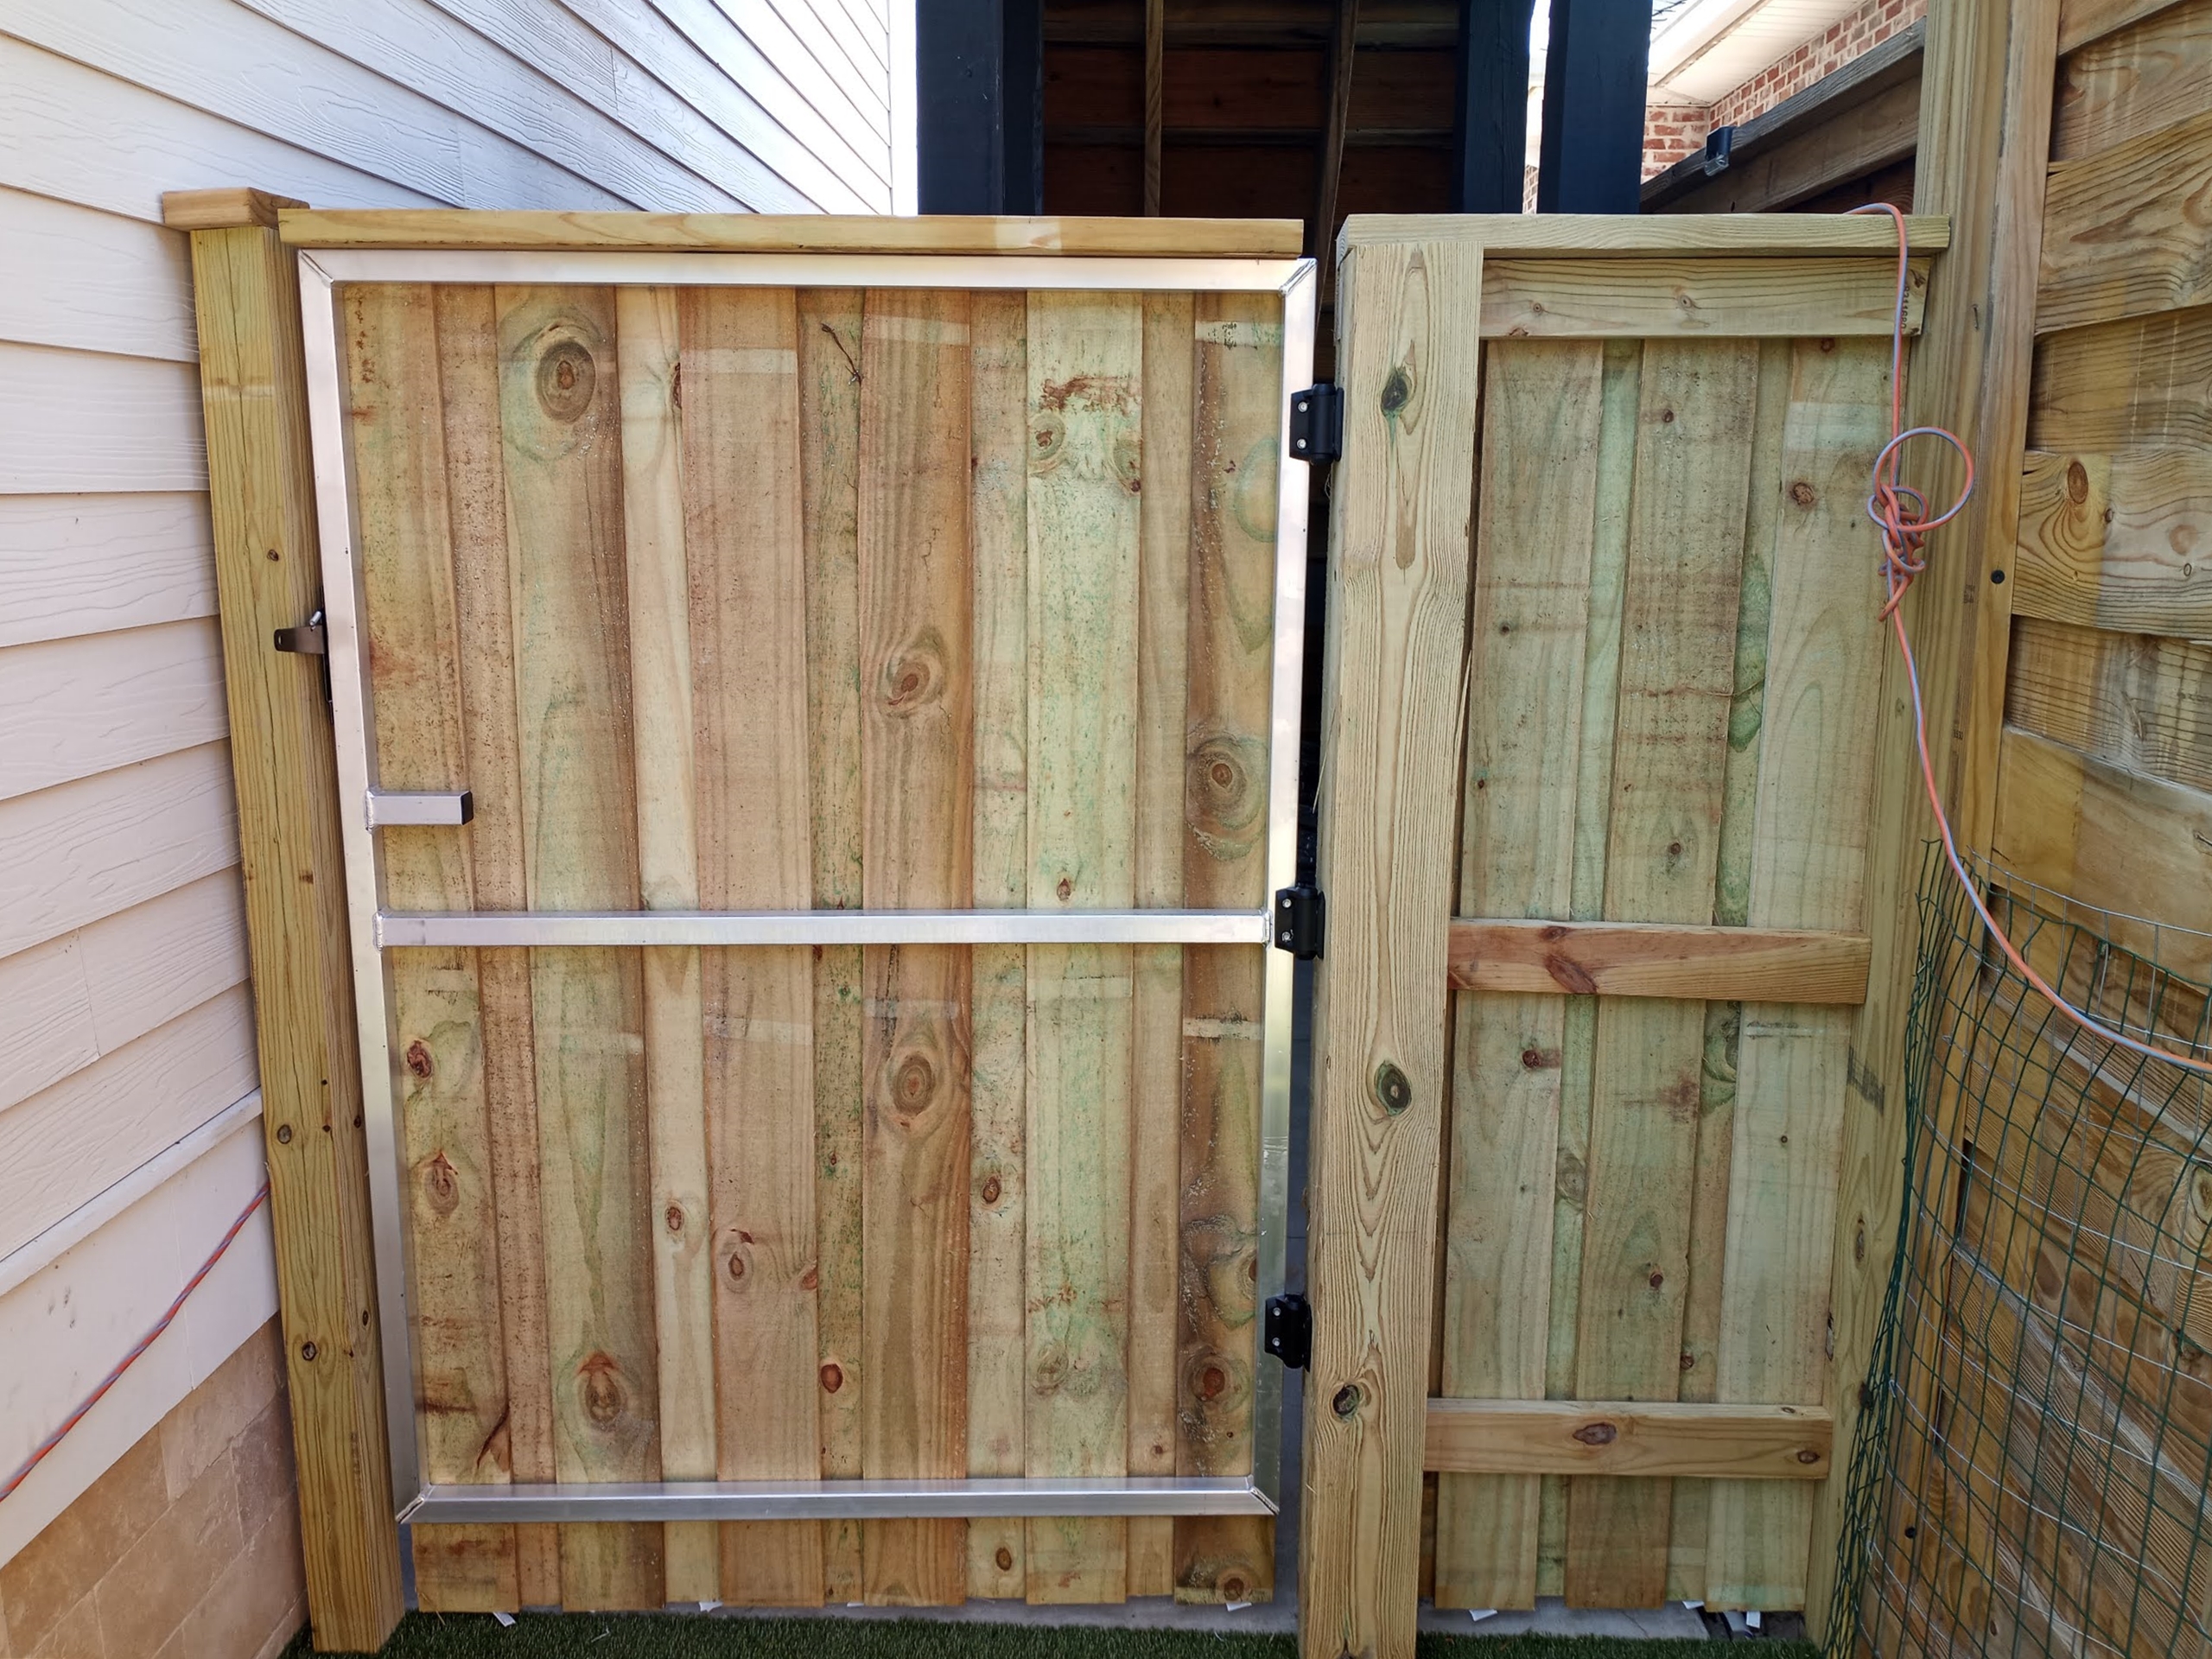 Our gates are constructed with a durable, lightweight aluminum frame